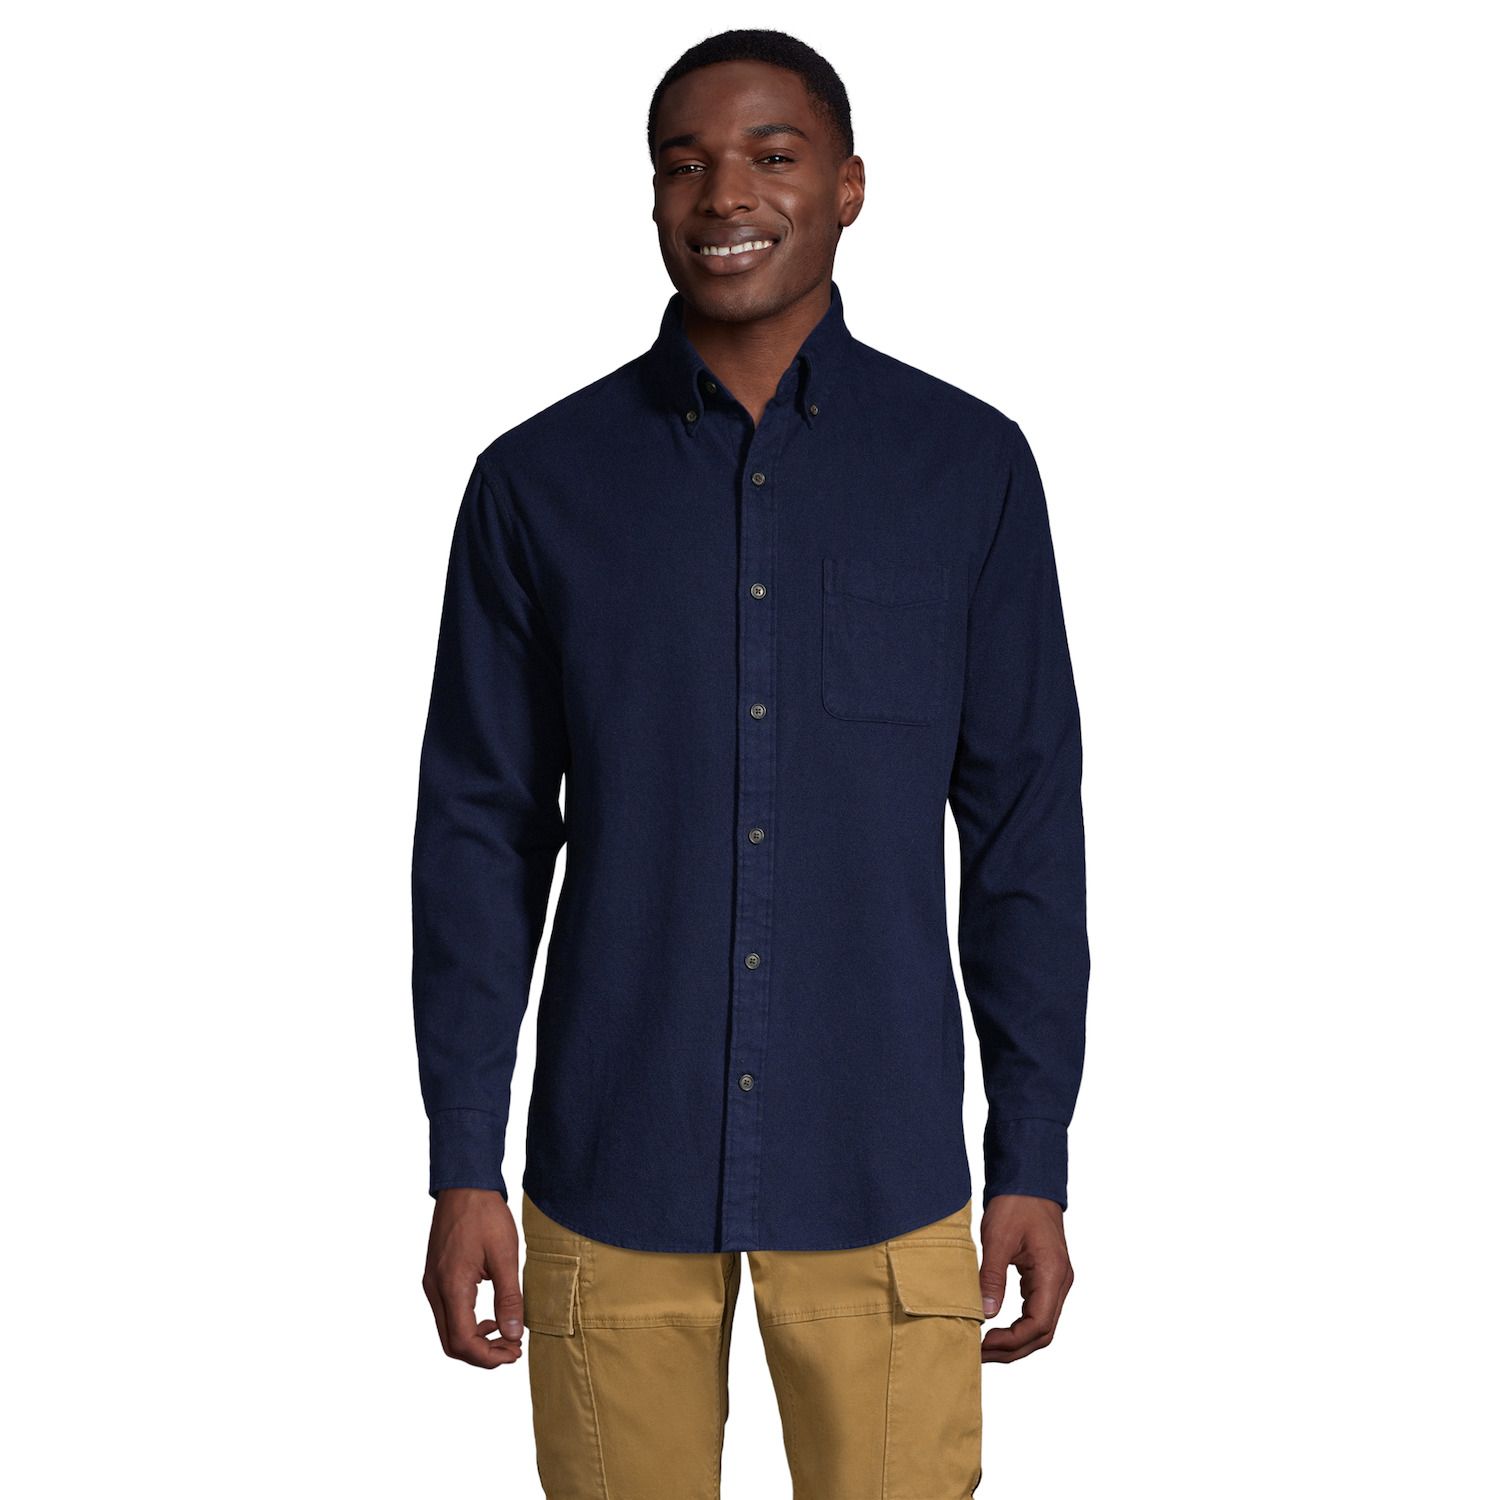 Image for Lands' End Big & Tall Traditional-Fit Flagship Flannel Button-Down Shirt at Kohl's.